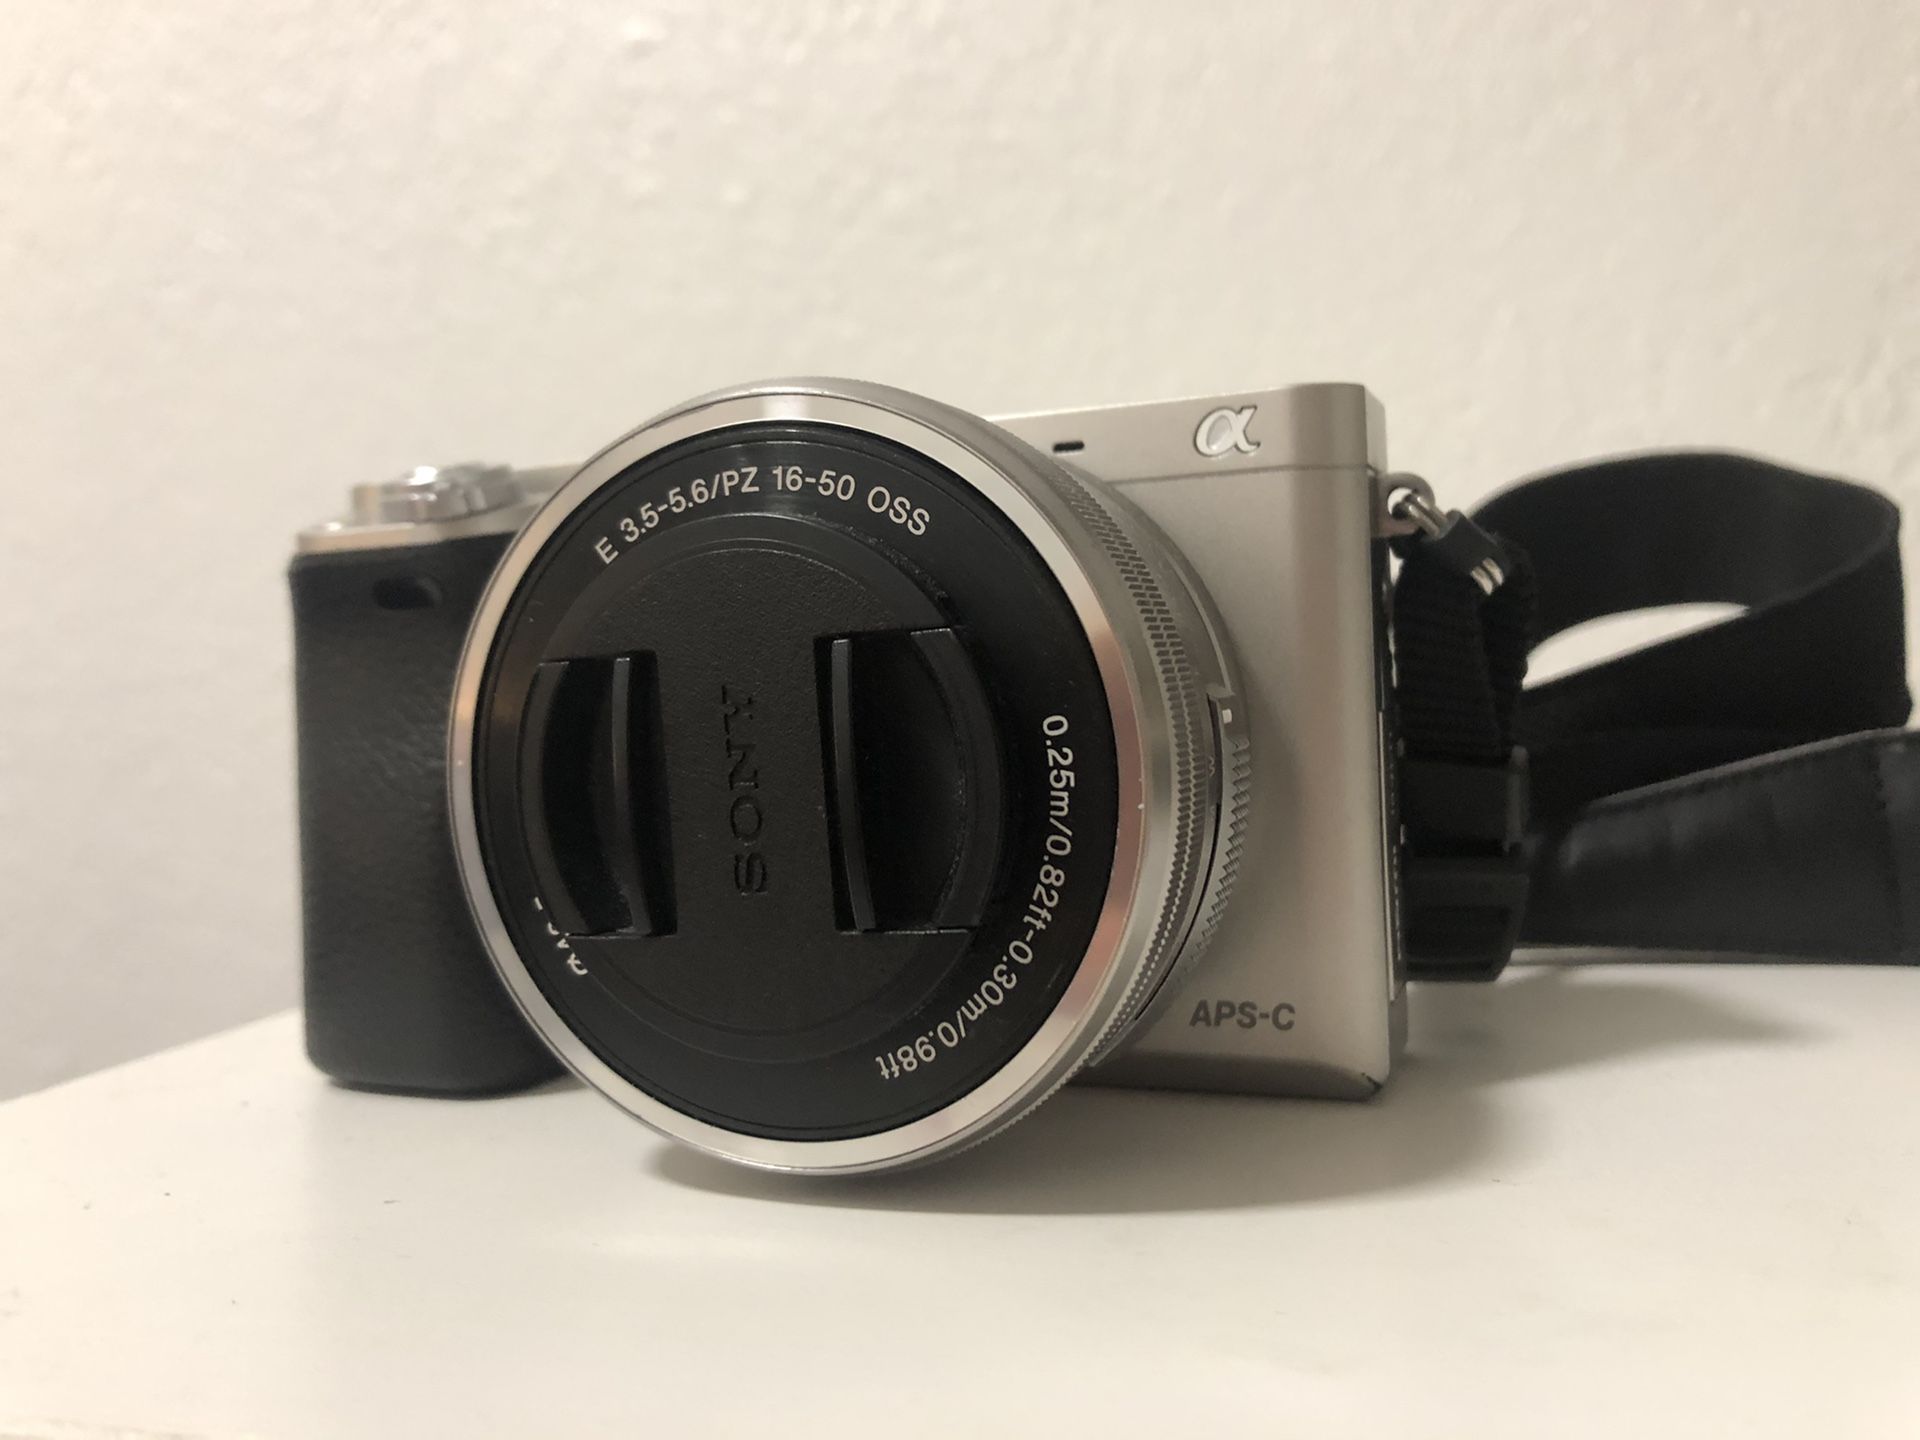 Sony a6000 mirrorless camera with 16-50mm kit lens and accessories